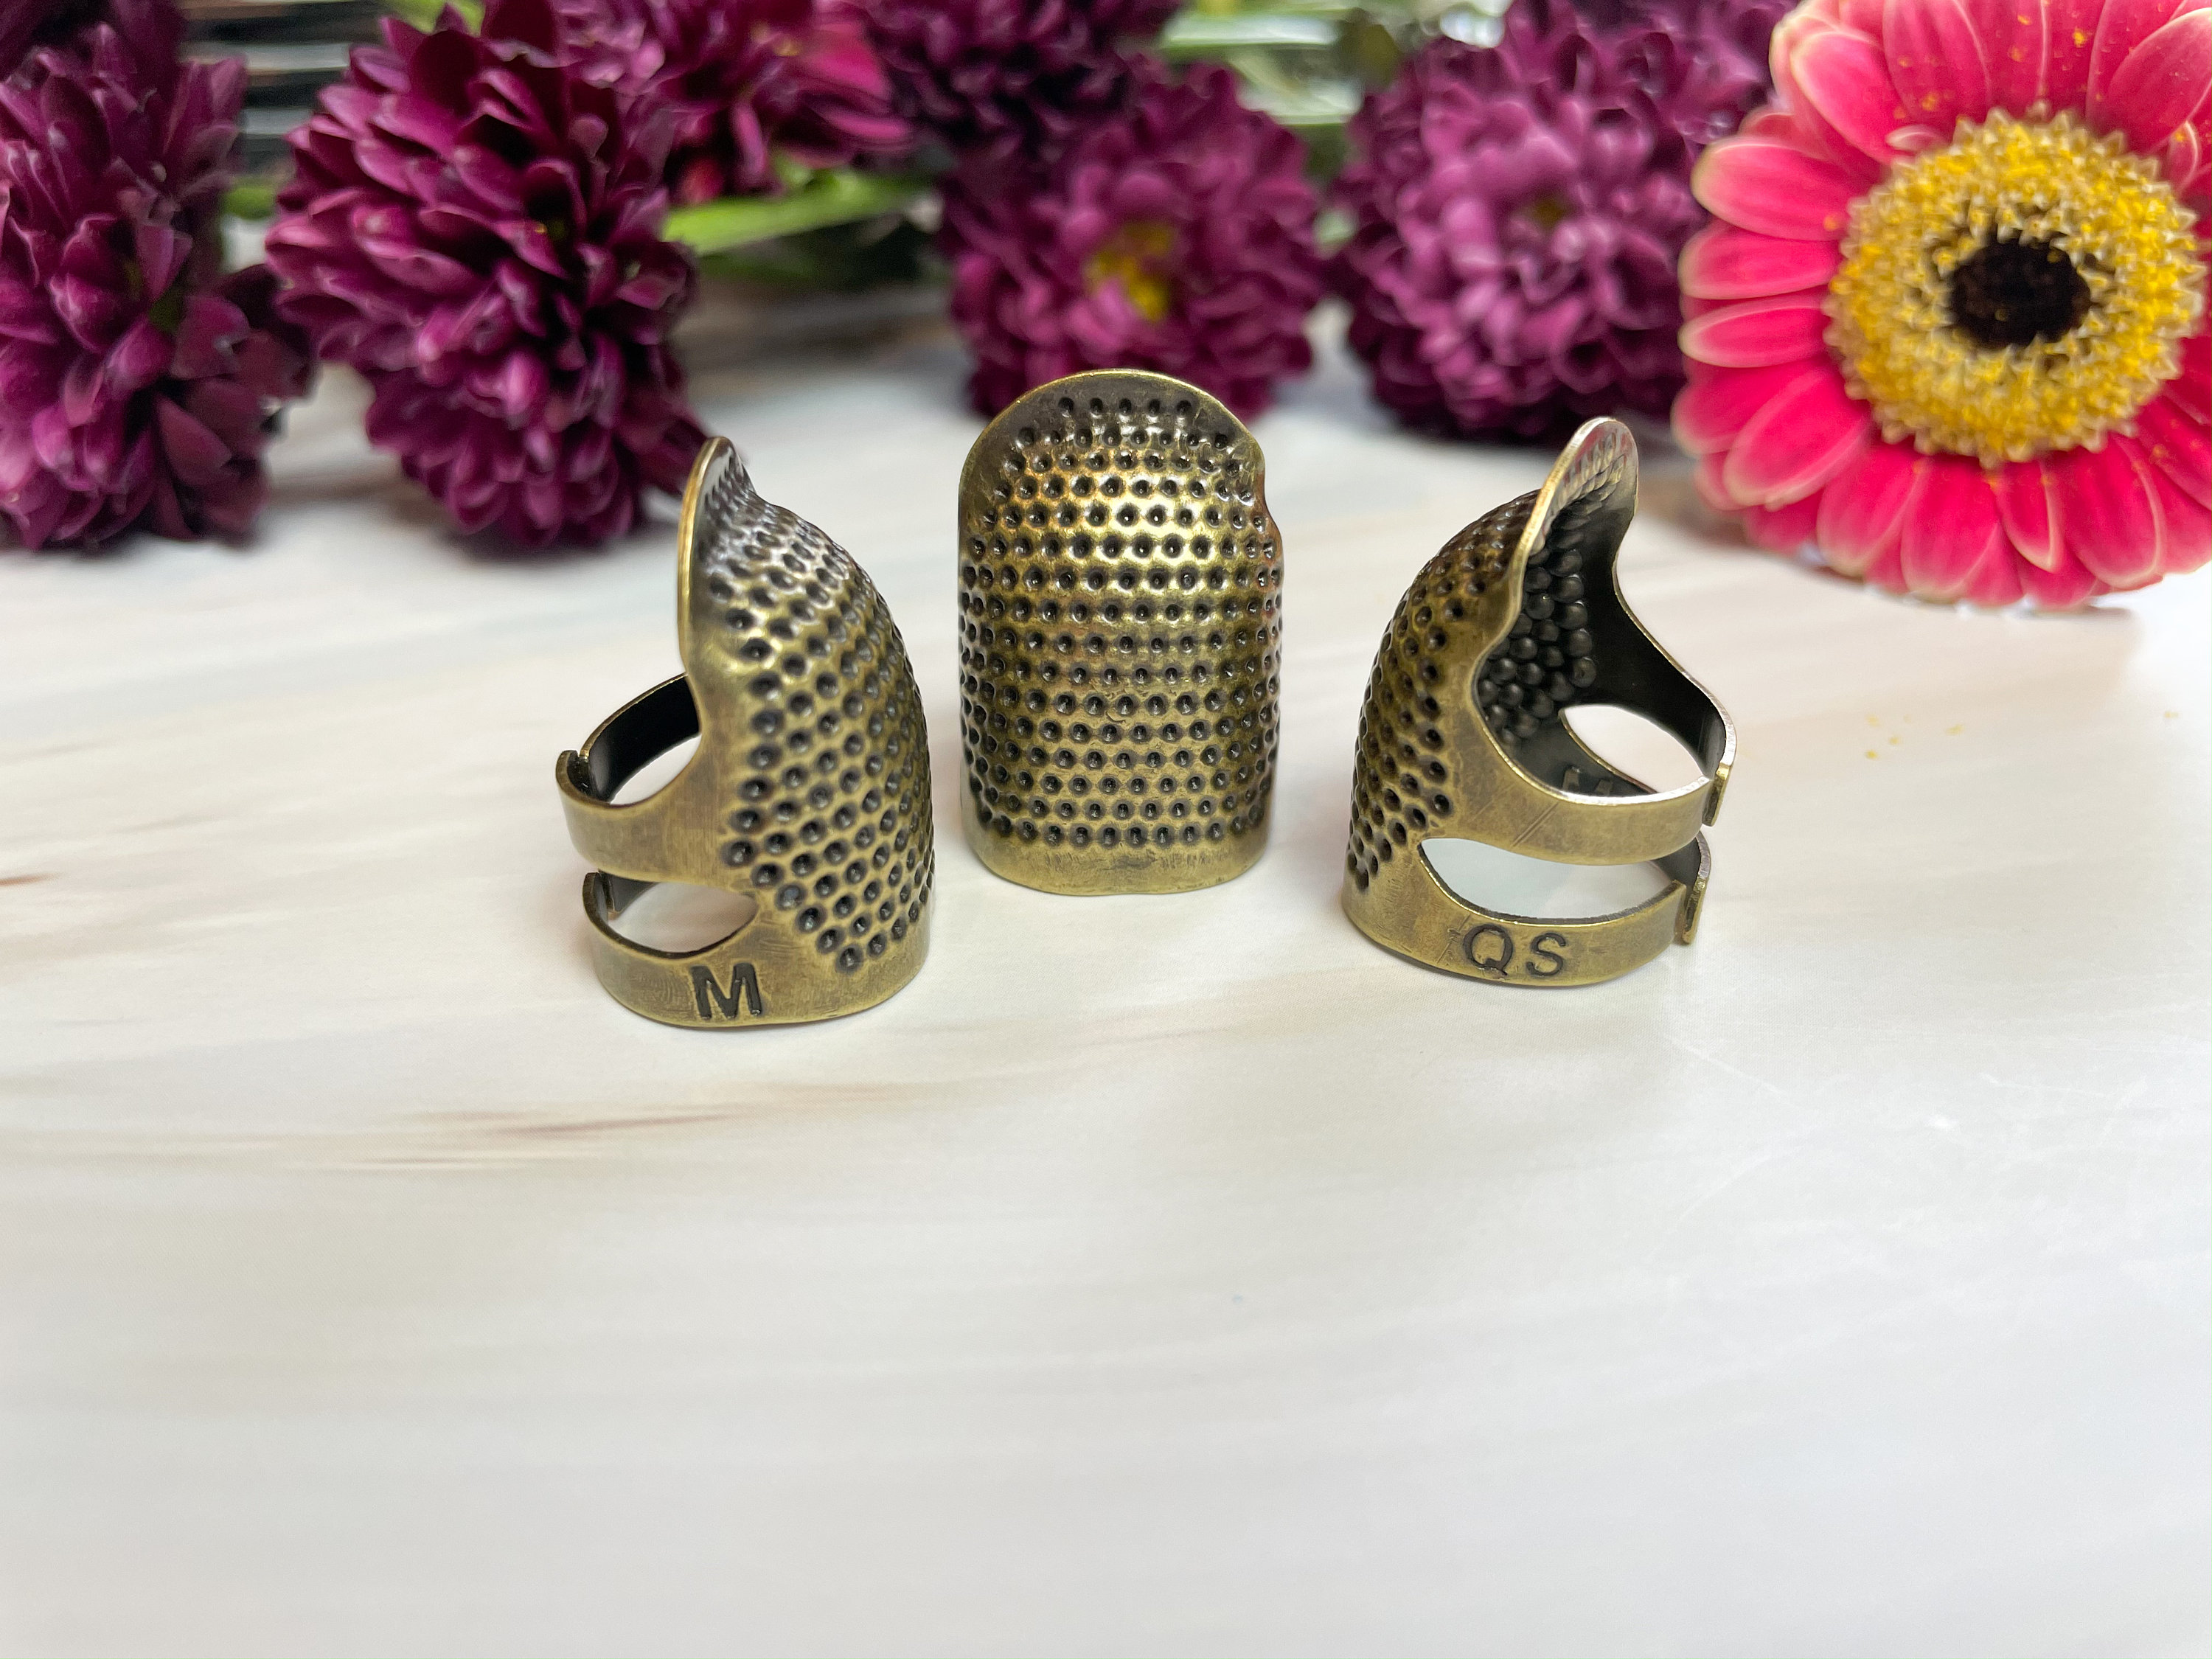 2 Sizes Sewing Thimble Finger Protector Retro Thimble Dedal Costura Knitting  Machine Home DIY Thimble Tools Sewing Accessories